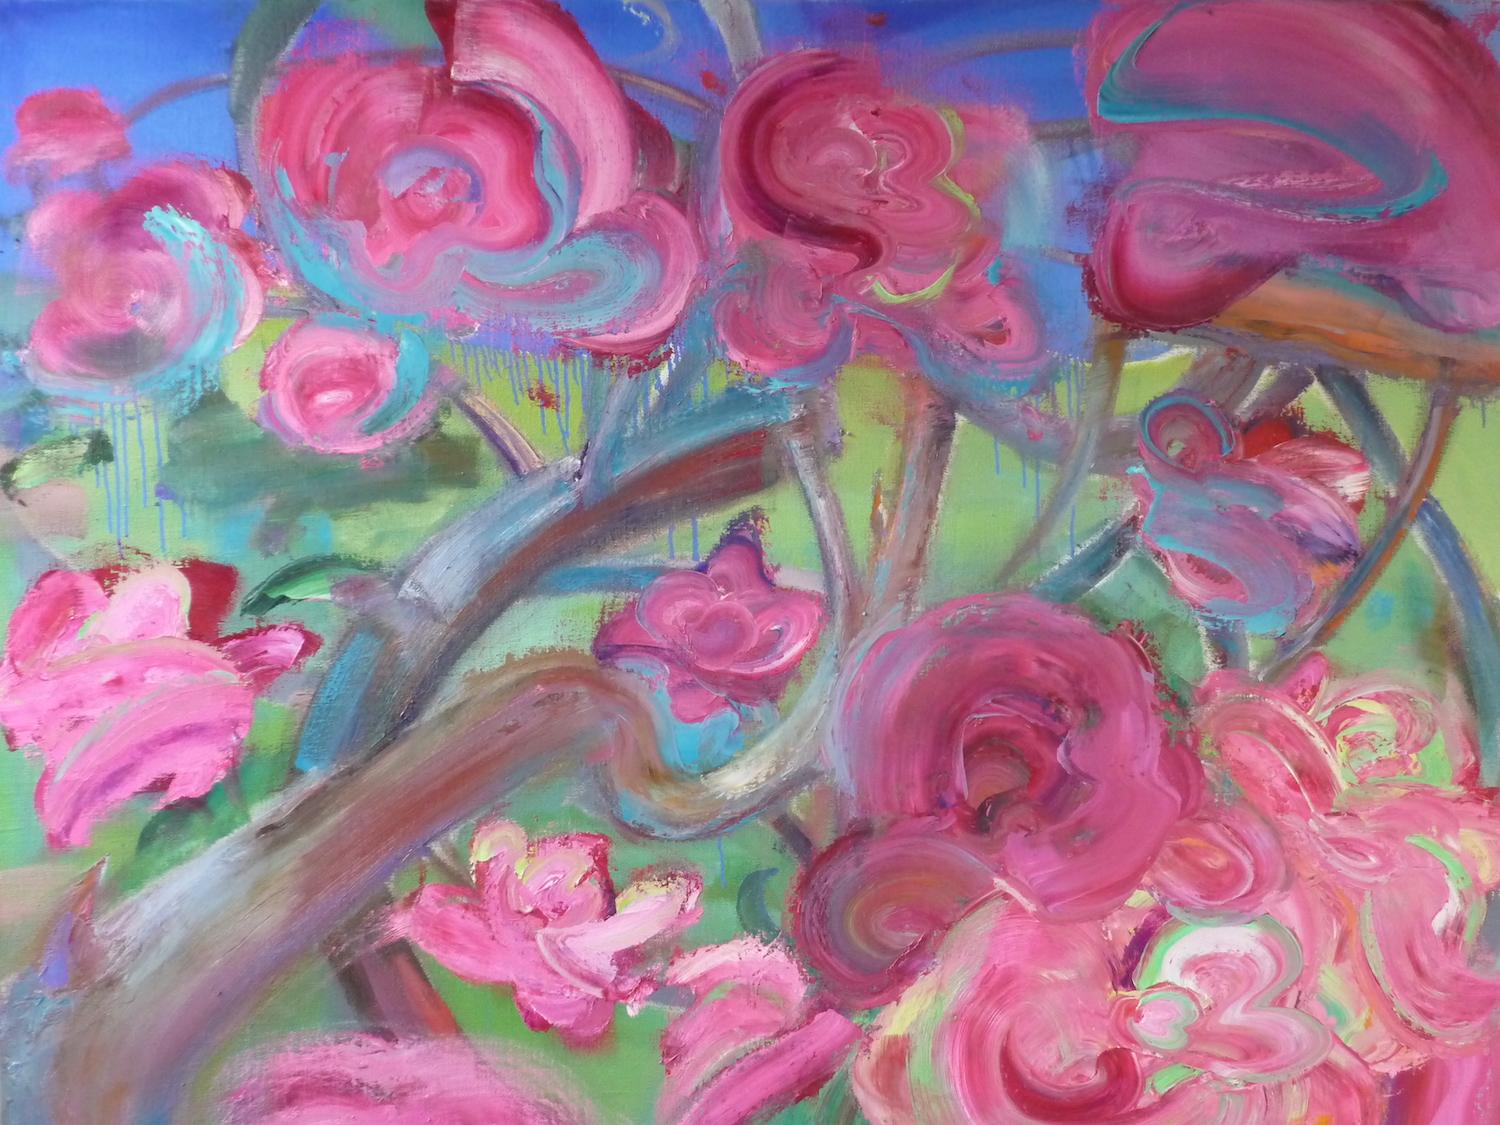 June by Christophe Dupety - Contemporary painting, Flora, Bright colors, Pink